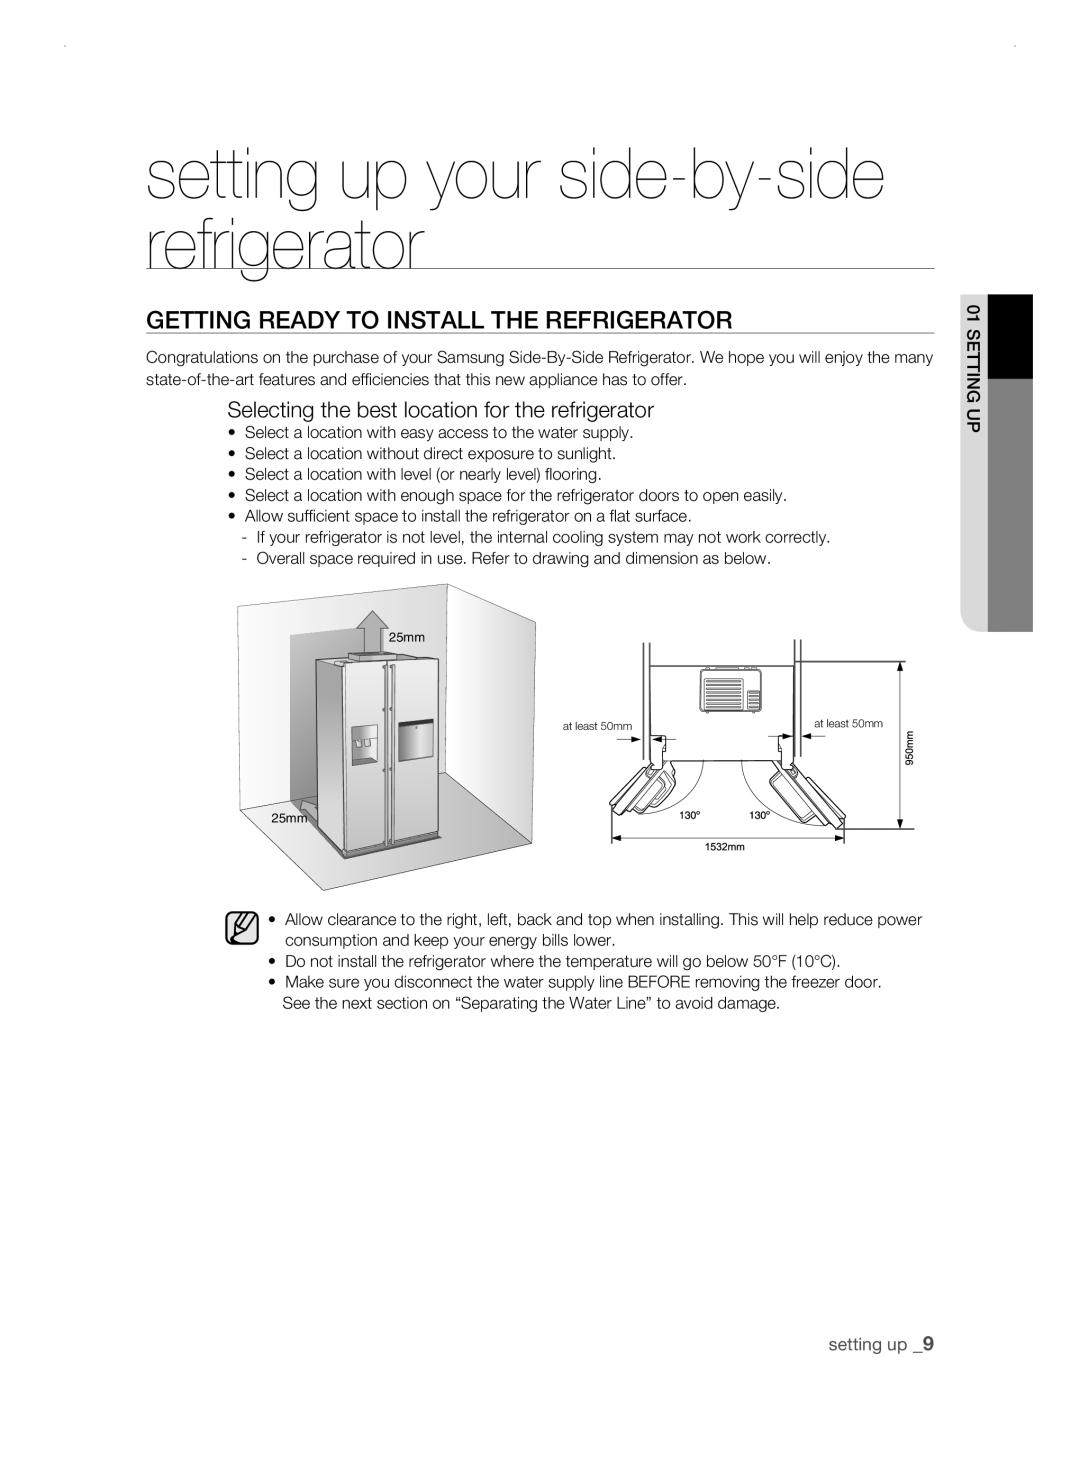 Samsung RSH3F, RSH3N setting up your side-by-side refrigerator, gEtting rEaDy to instaLL tHE rEfrigErator, setting up  